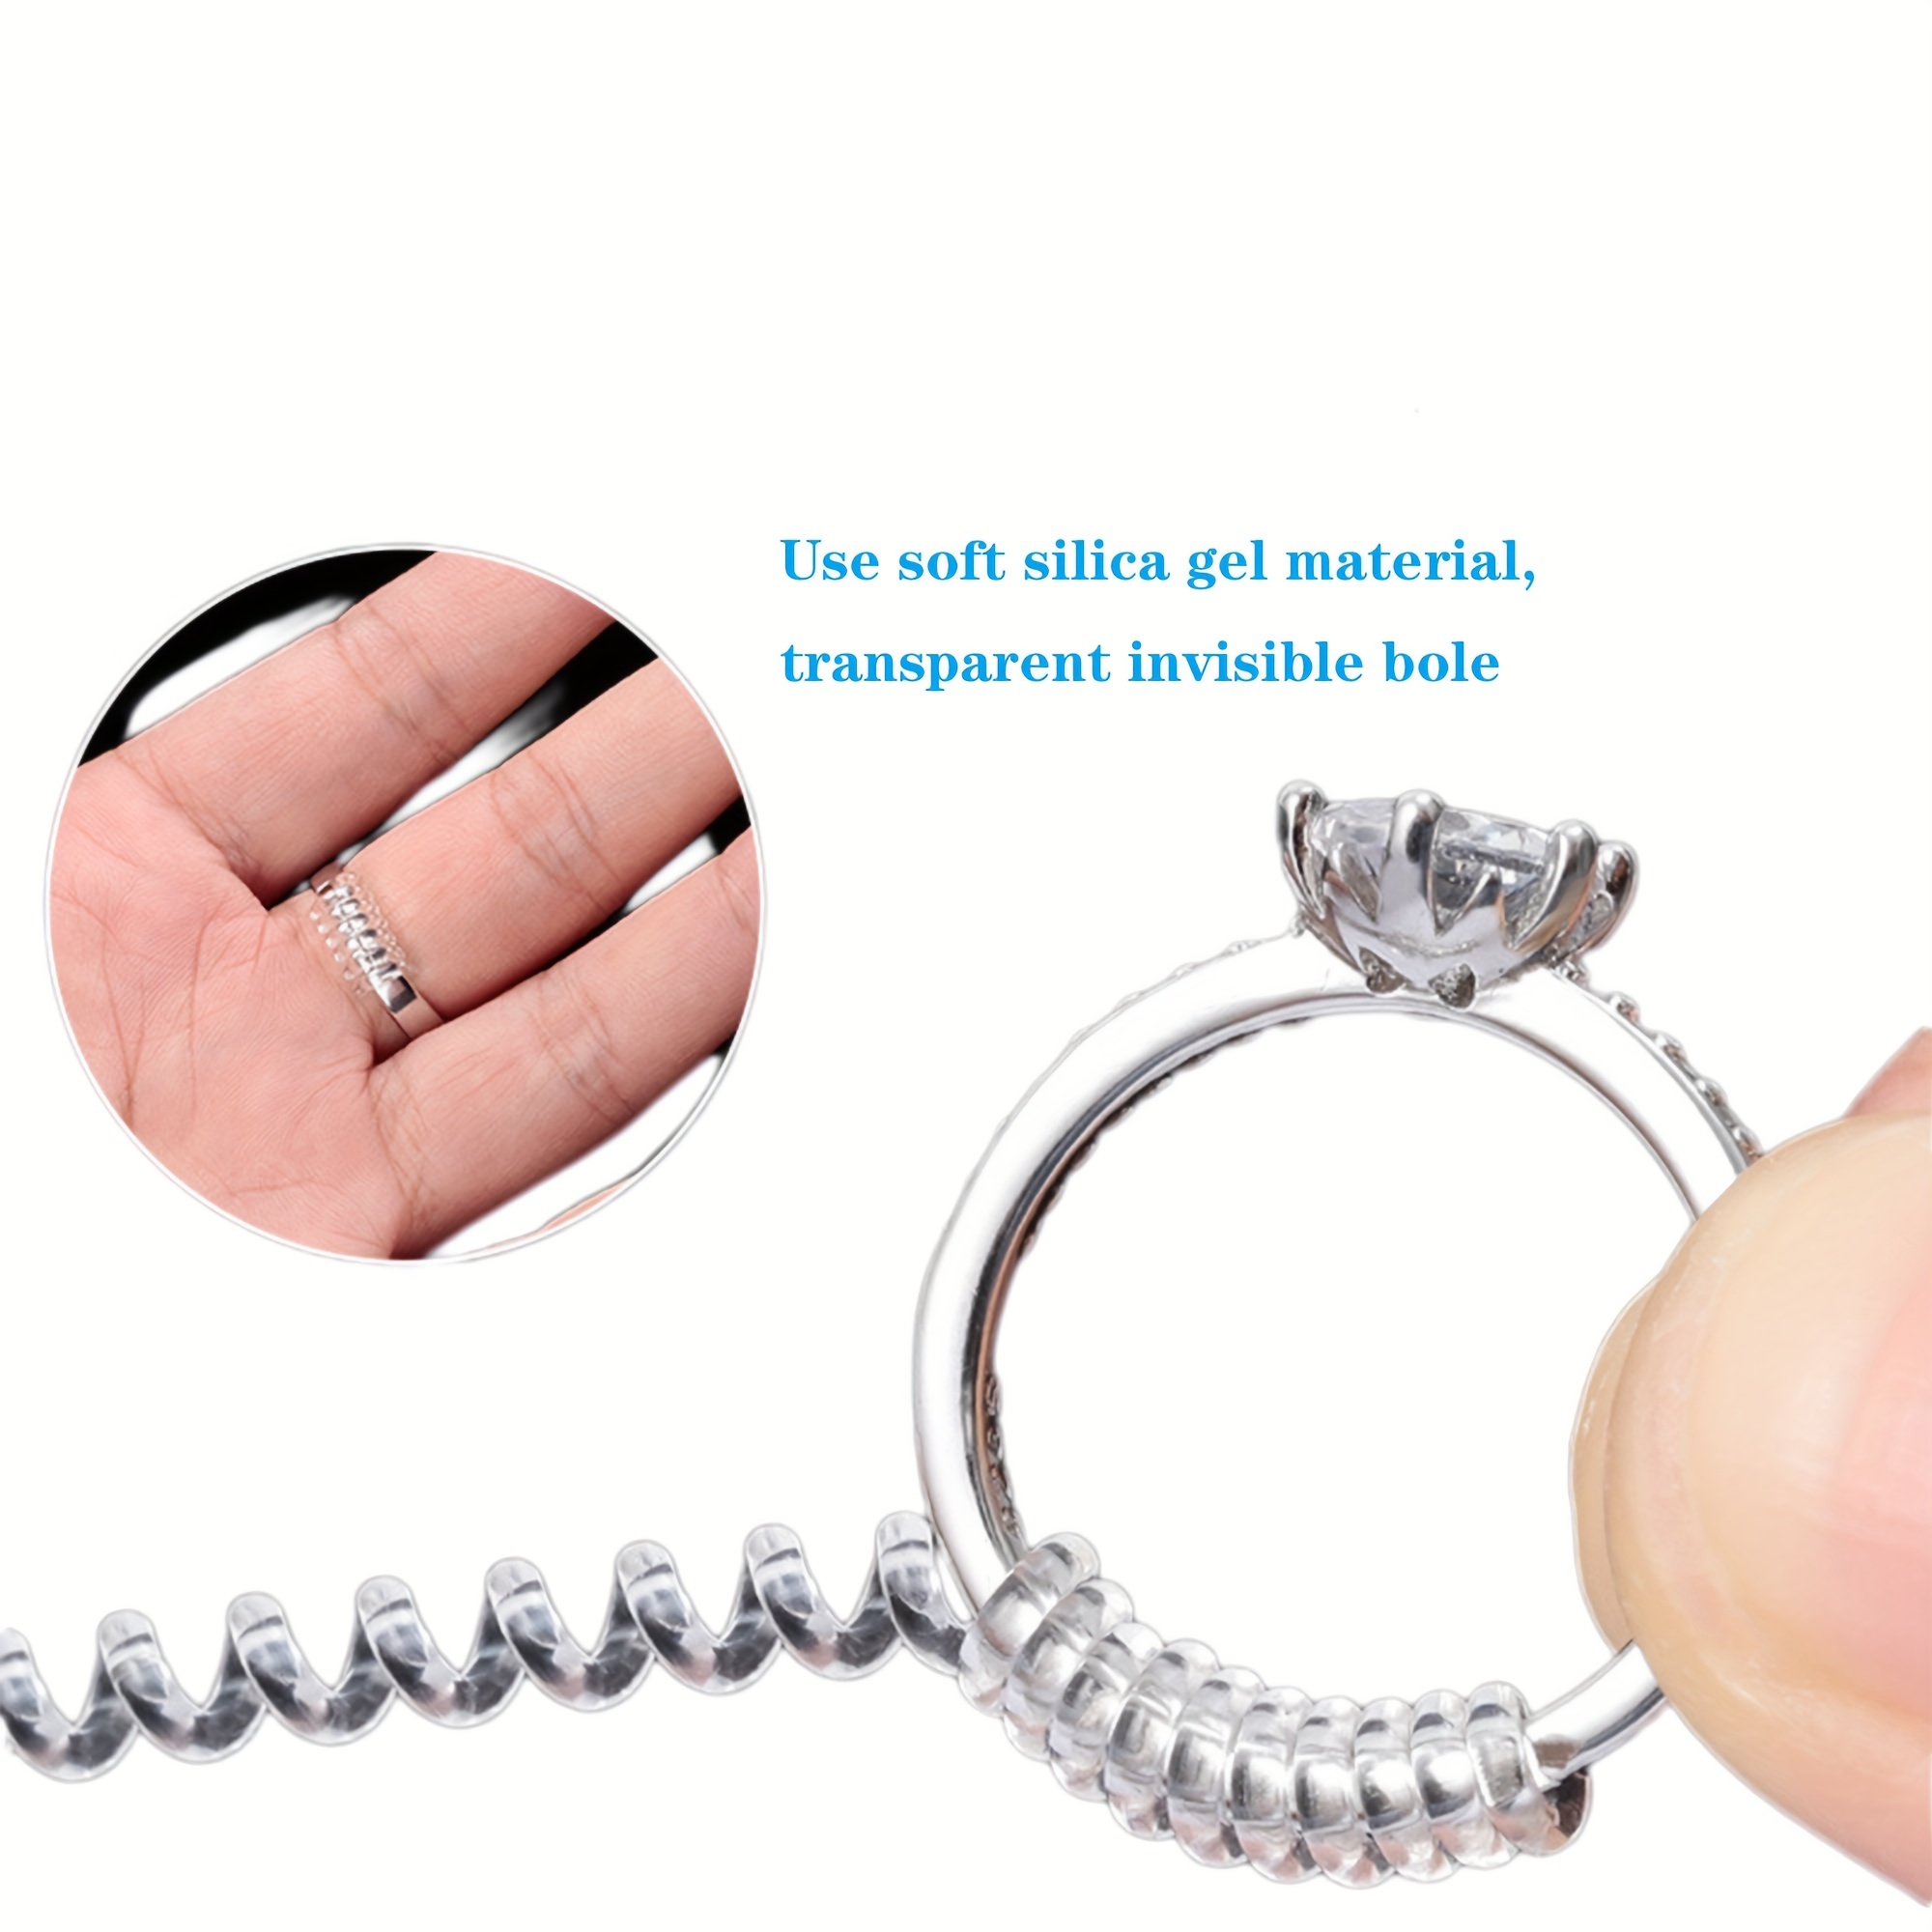 Invisible Ring Size Adjuster for Loose Rings Ring Adjuster Sizer